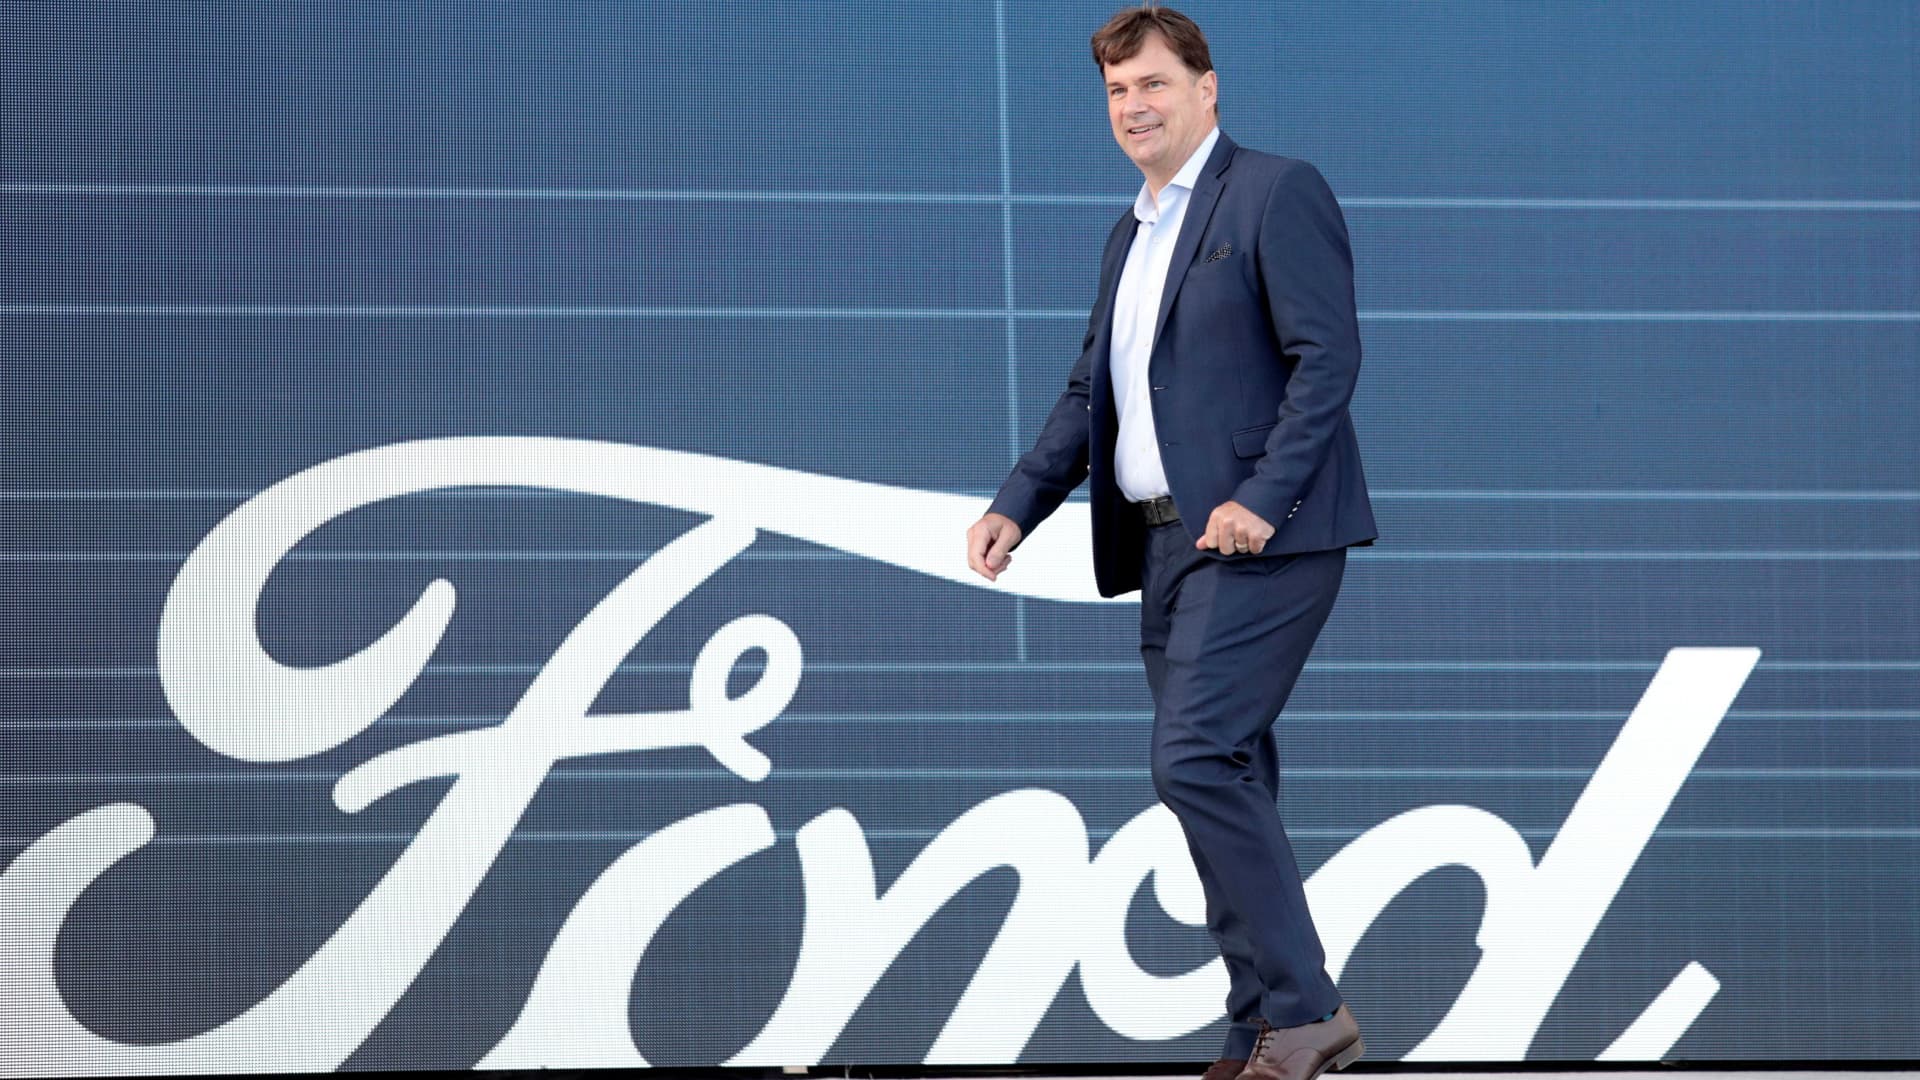 Ford Motor Co. CEO Jim Farley walks to speak at a news conference at the Rouge Complex in Dearborn, Michigan, September 17, 2020.